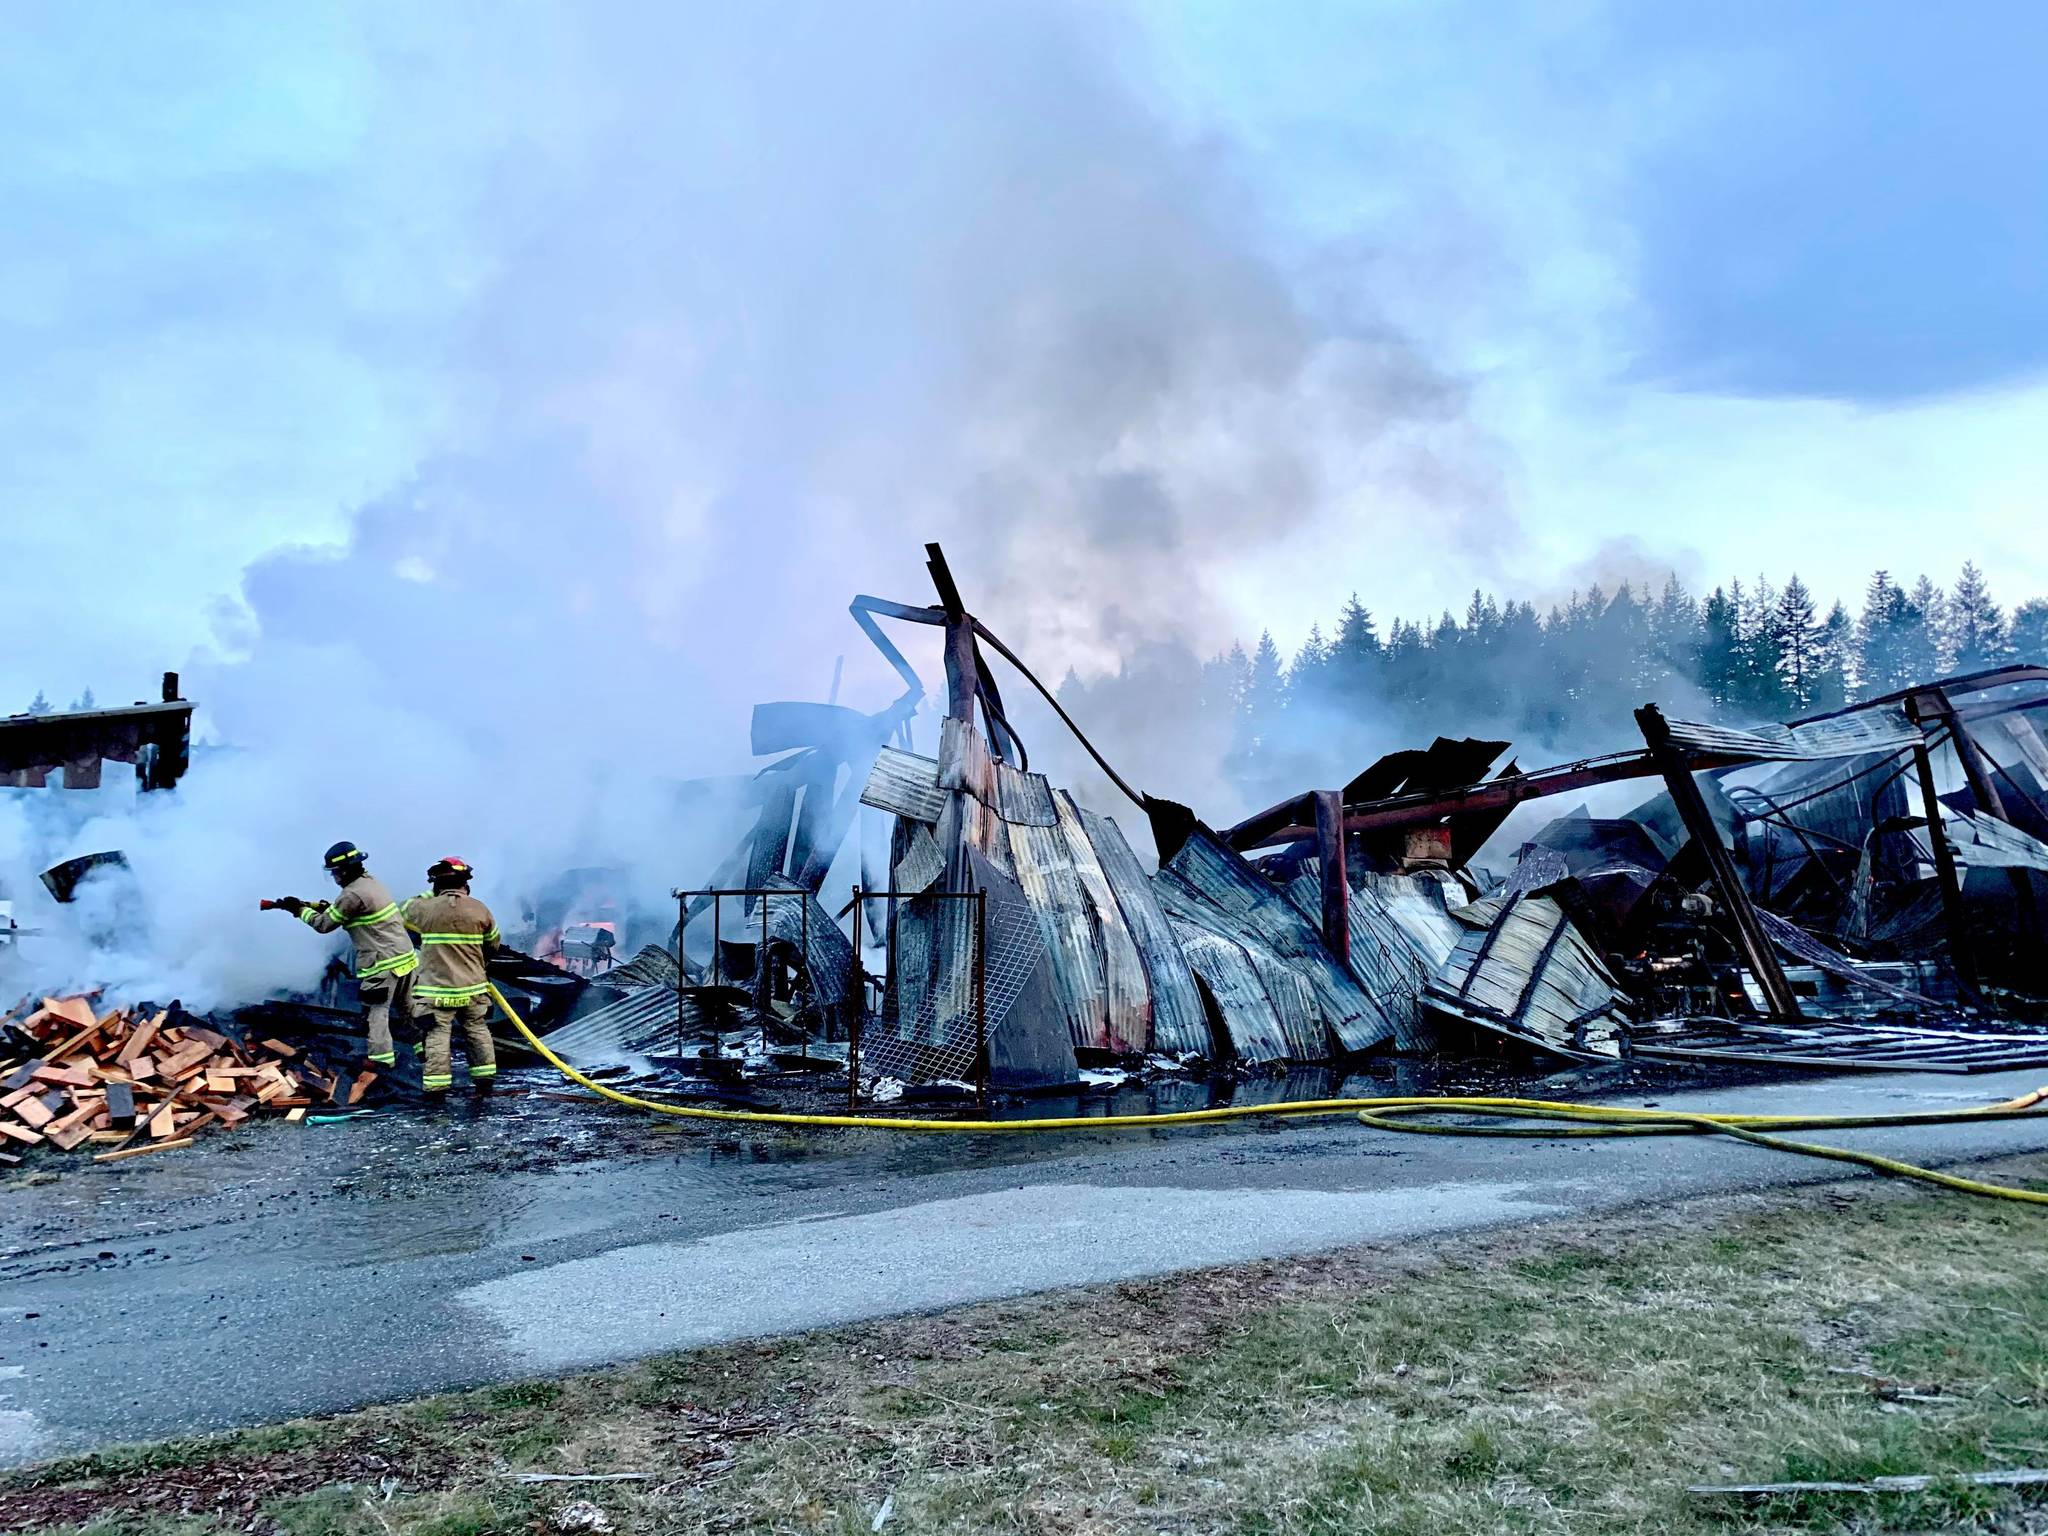 The structure, which contained an Airstream trailer within a large storage area, was a total loss.
(Photo by Heather Mayhugh)